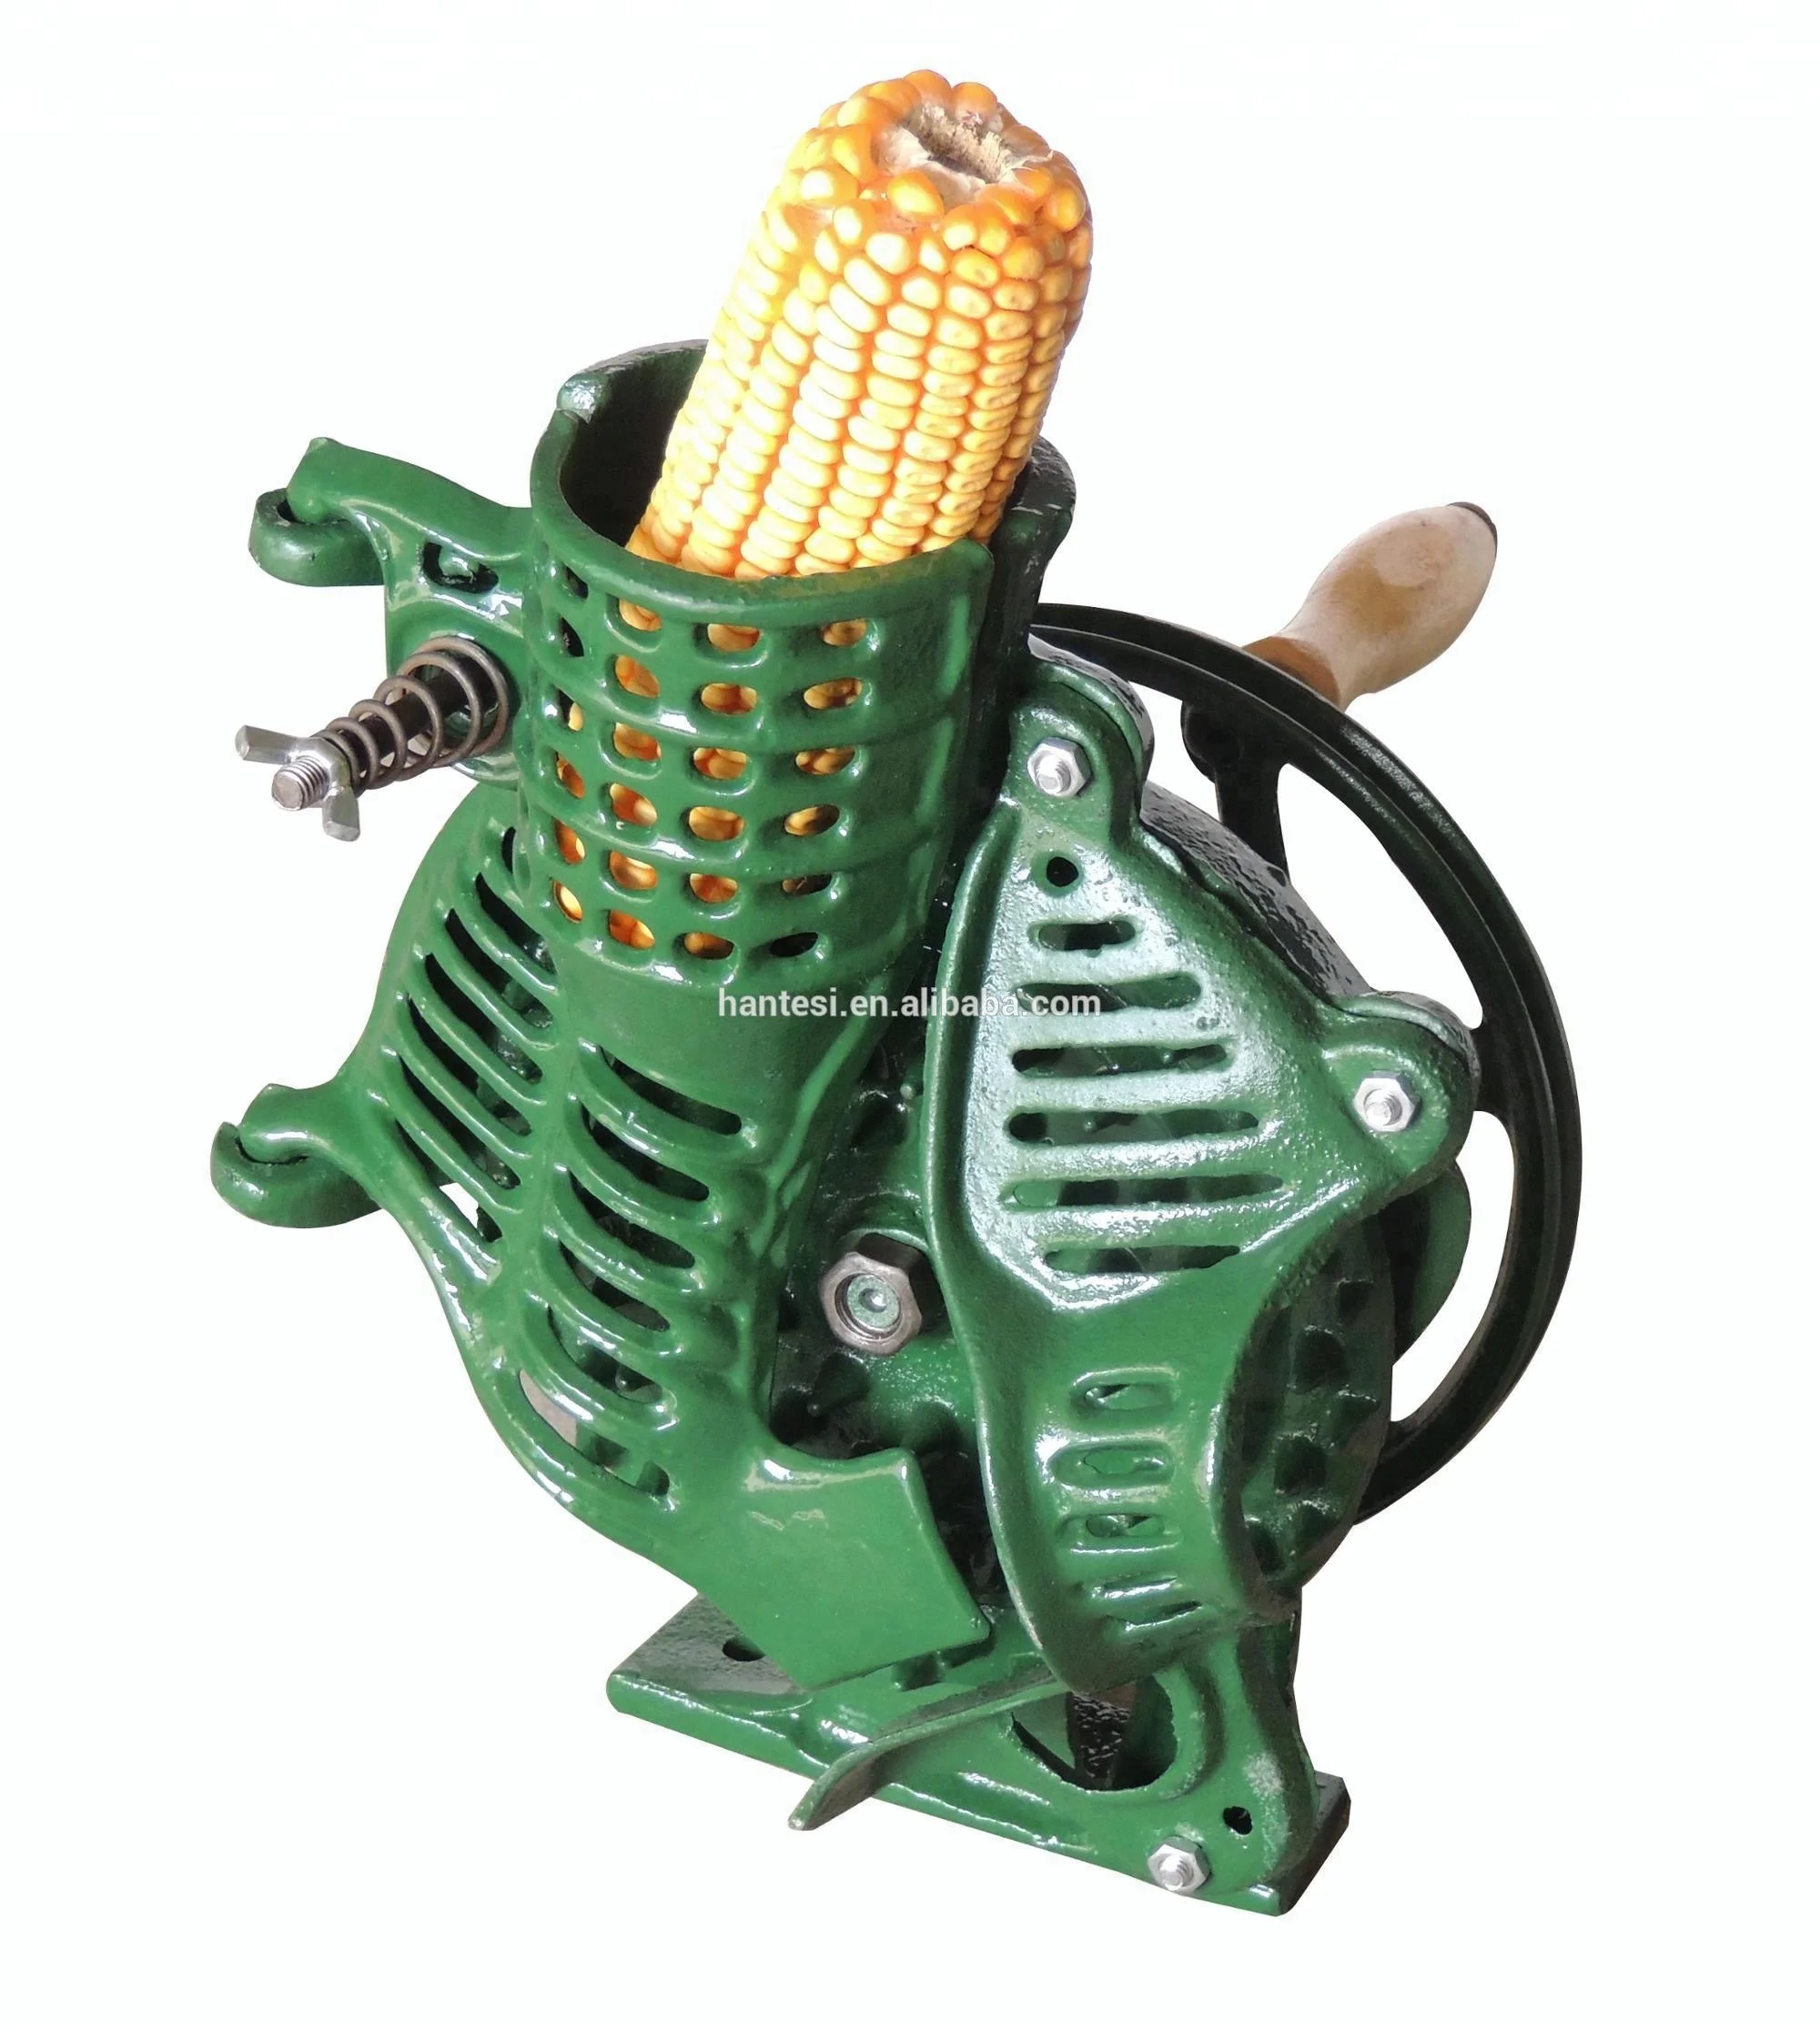 Manual Operated Corn Thresher Maize Sheller Products From Linyi Hantesi